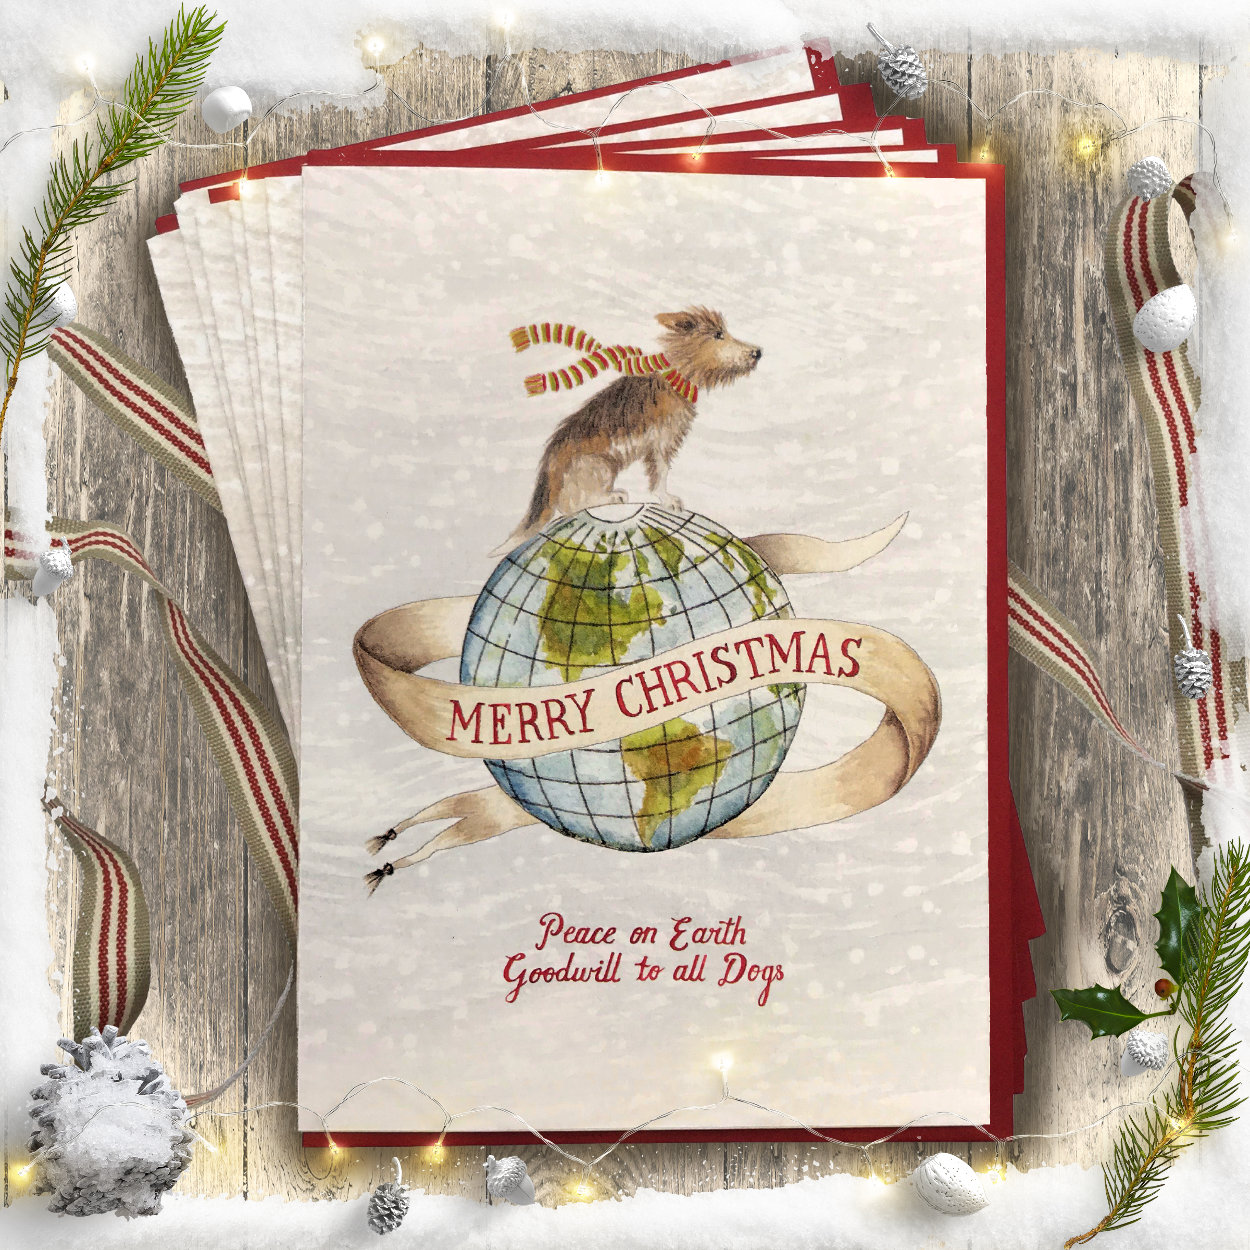 Peace on Earth Dog Charity Christmas Card | The Enlightened Hound